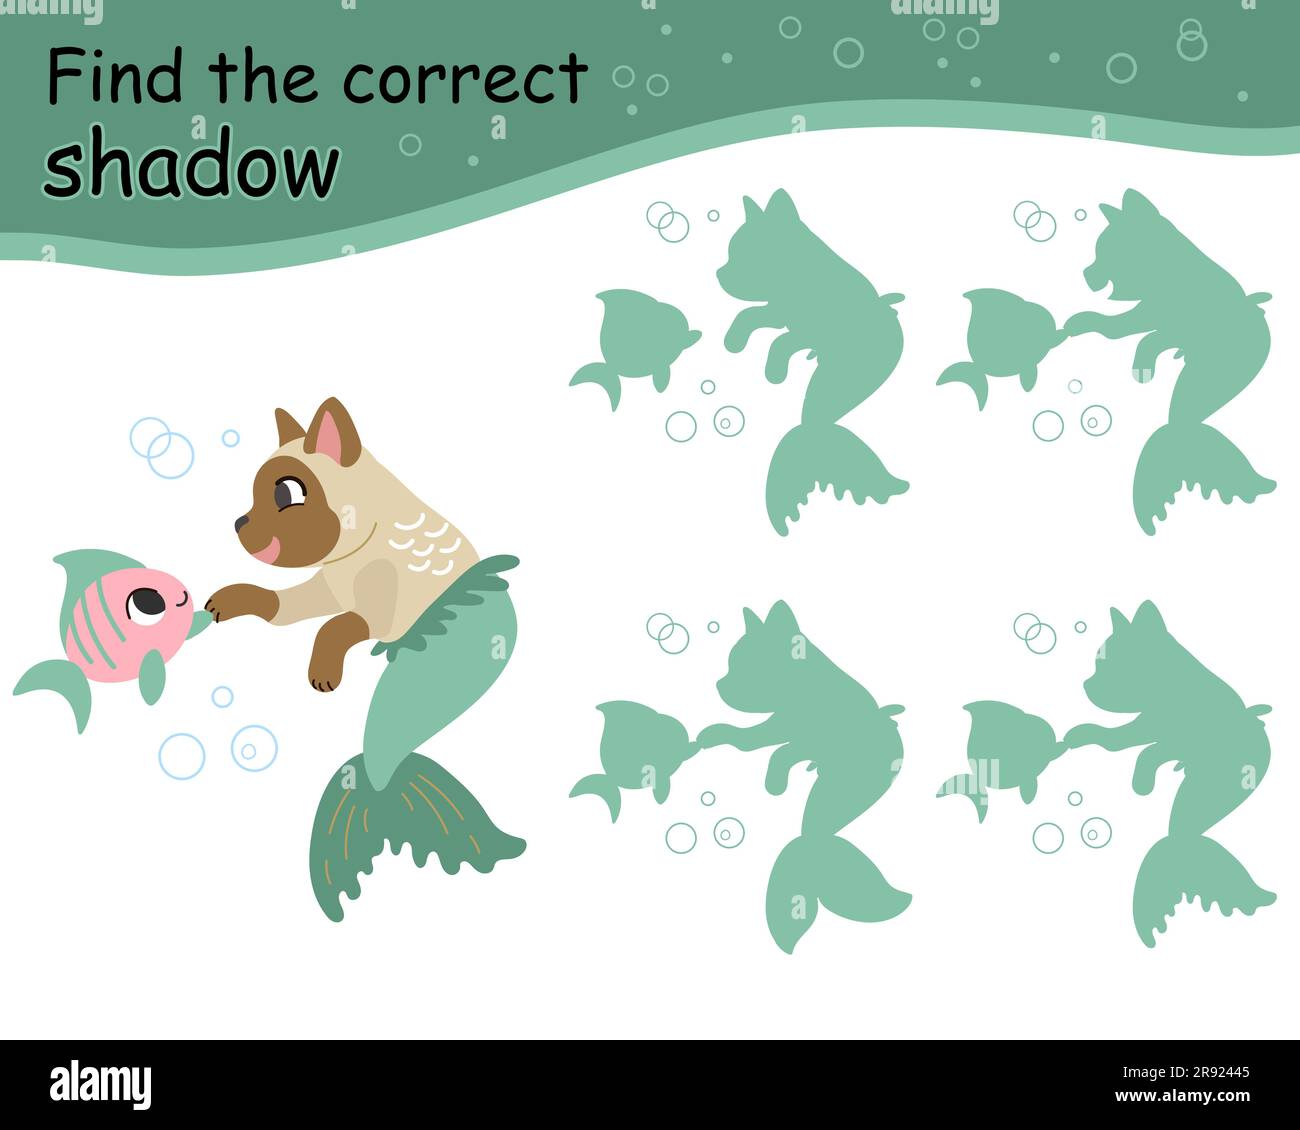 Find the correct shadow game with mermaid. Educational game for children. Cute cartoon mermaid. Shadow matching Stock Vector